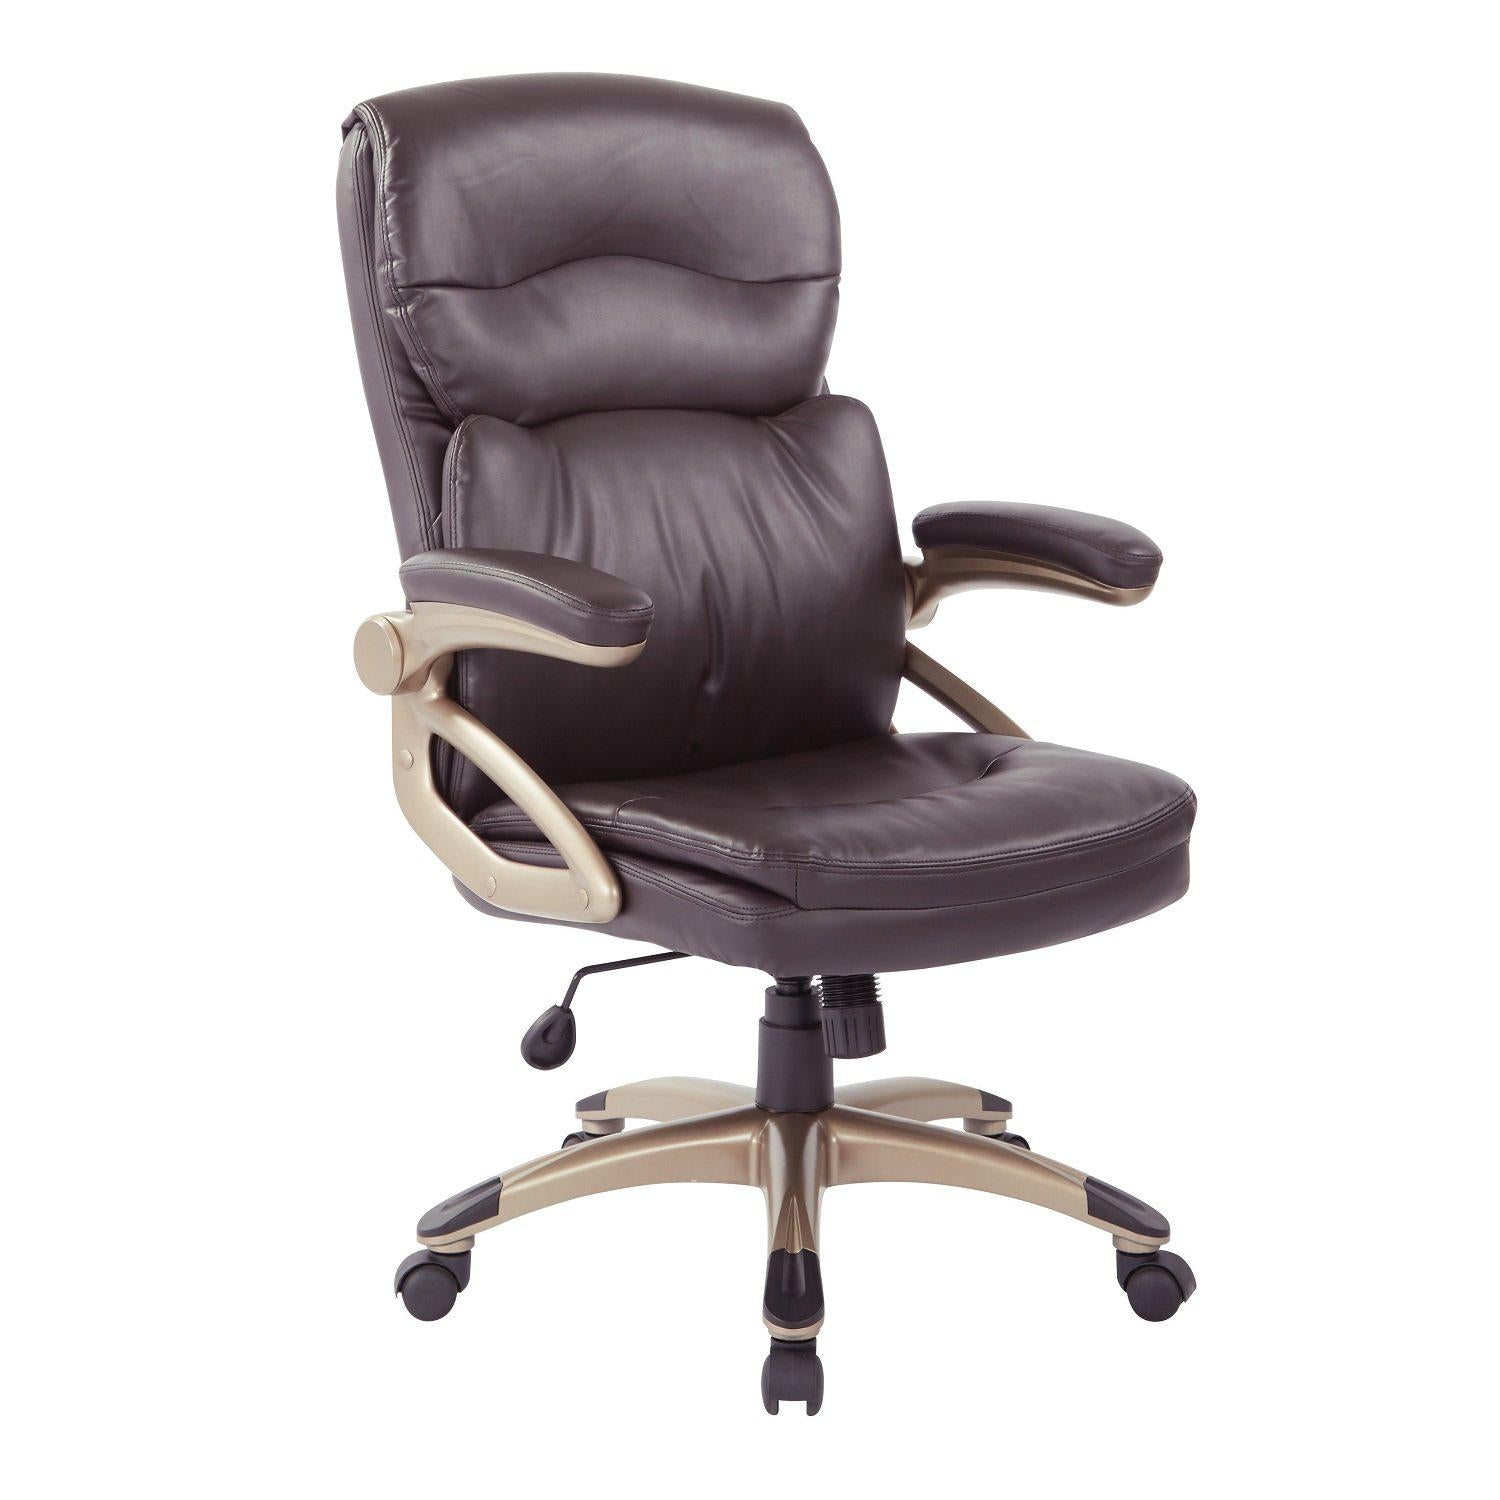 High Back Bonded Leather Executive Manager's Chair, Cocoa Frame/Espresso Upholstery